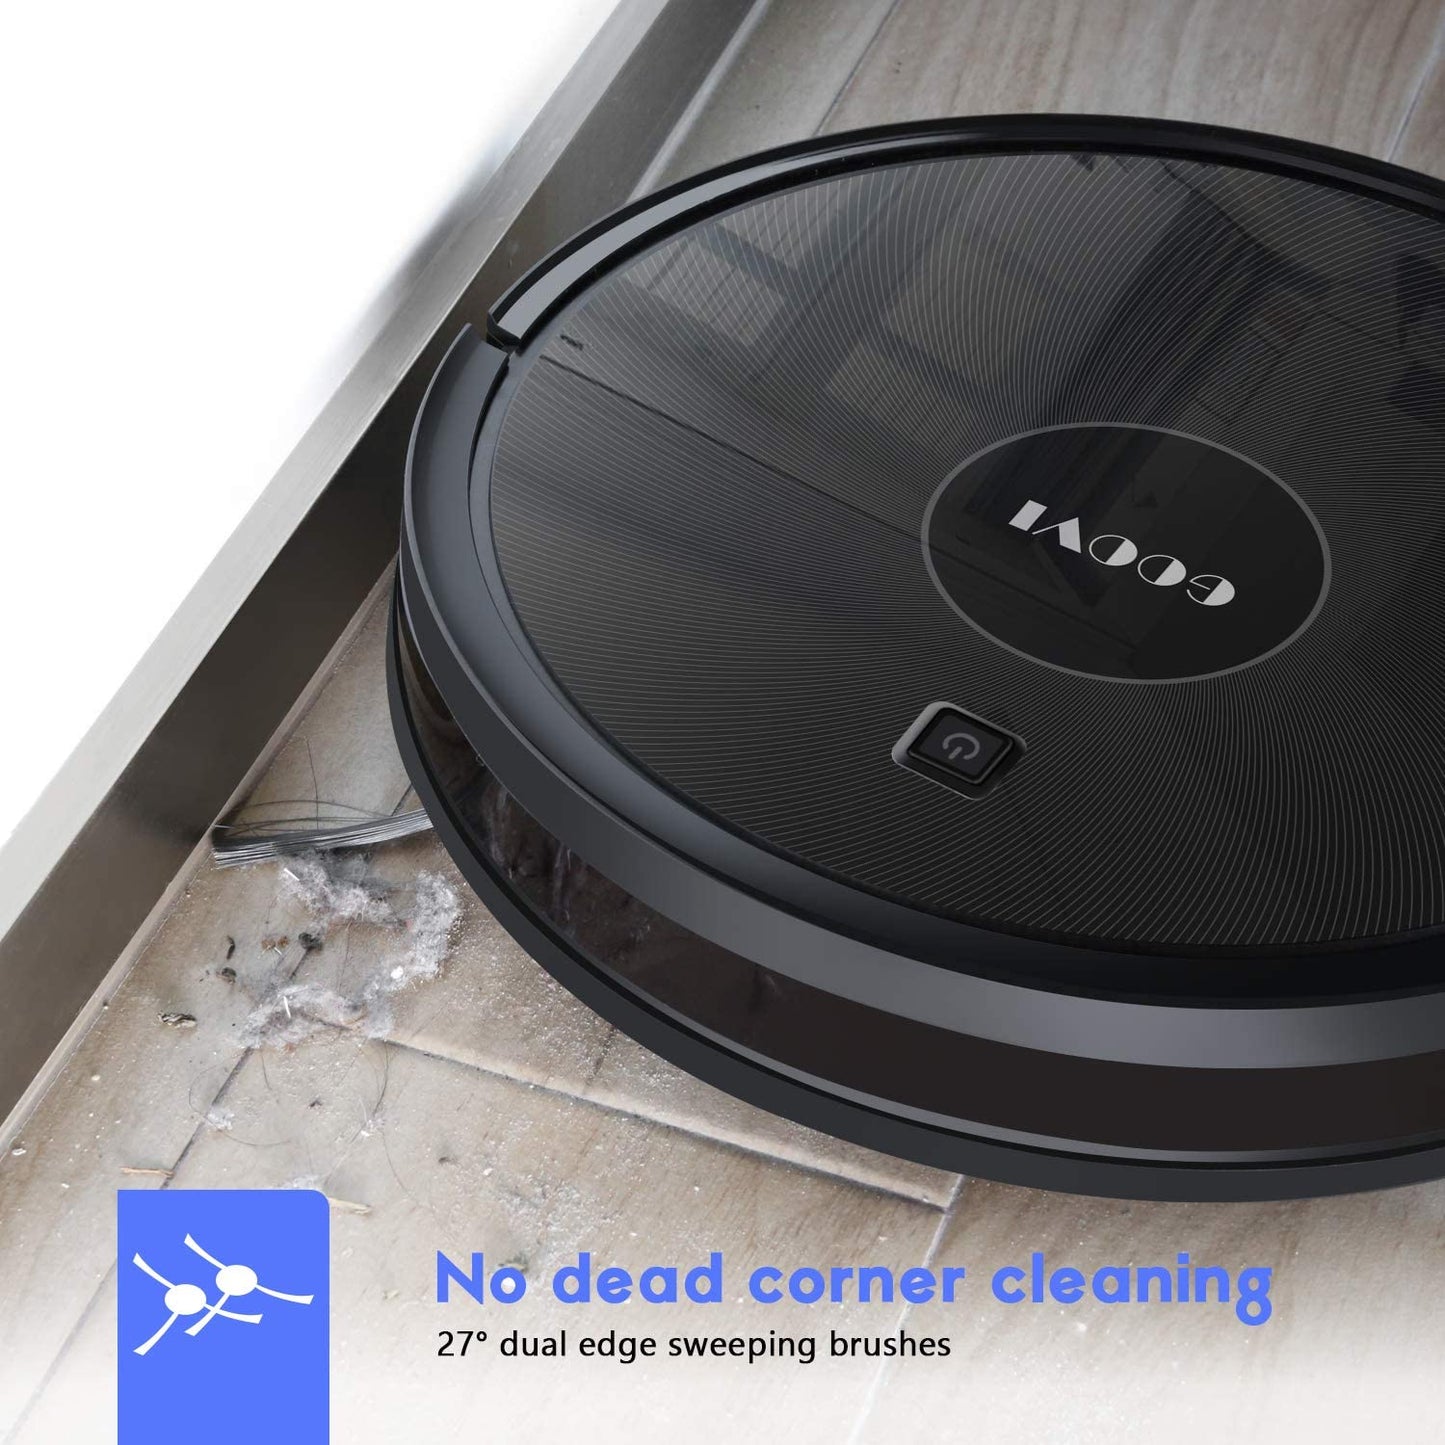 GOOVI D380 Smart Automatic Self Charge 1600Pa Nidec Brushless DC Motor Cleaning Robot Vacuum Cleaner baby magazin 